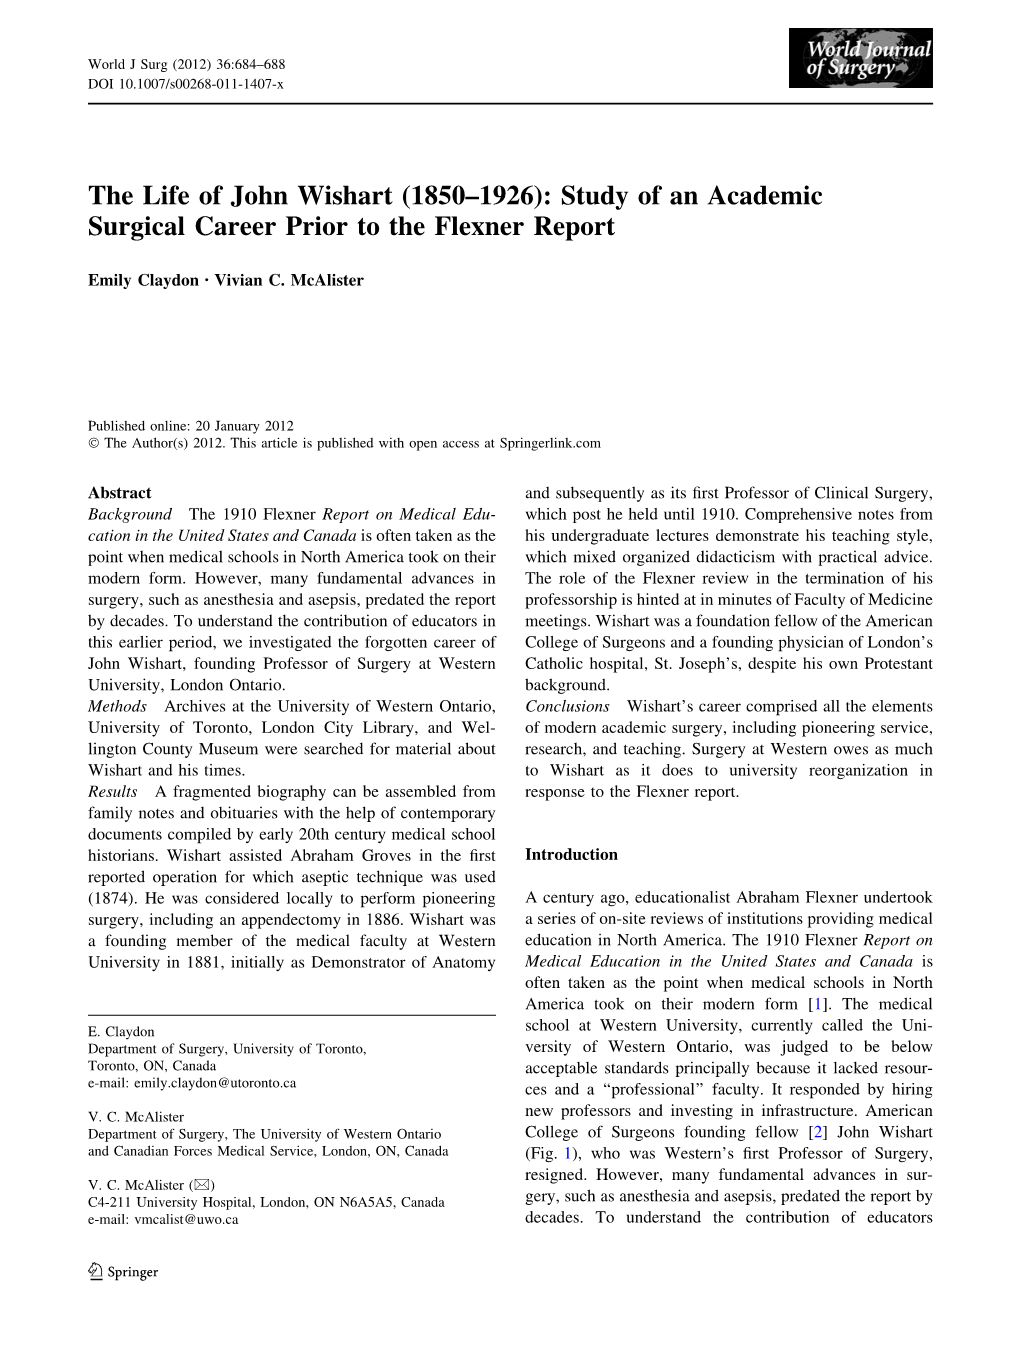 The Life of John Wishart (1850–1926): Study of an Academic Surgical Career Prior to the Flexner Report